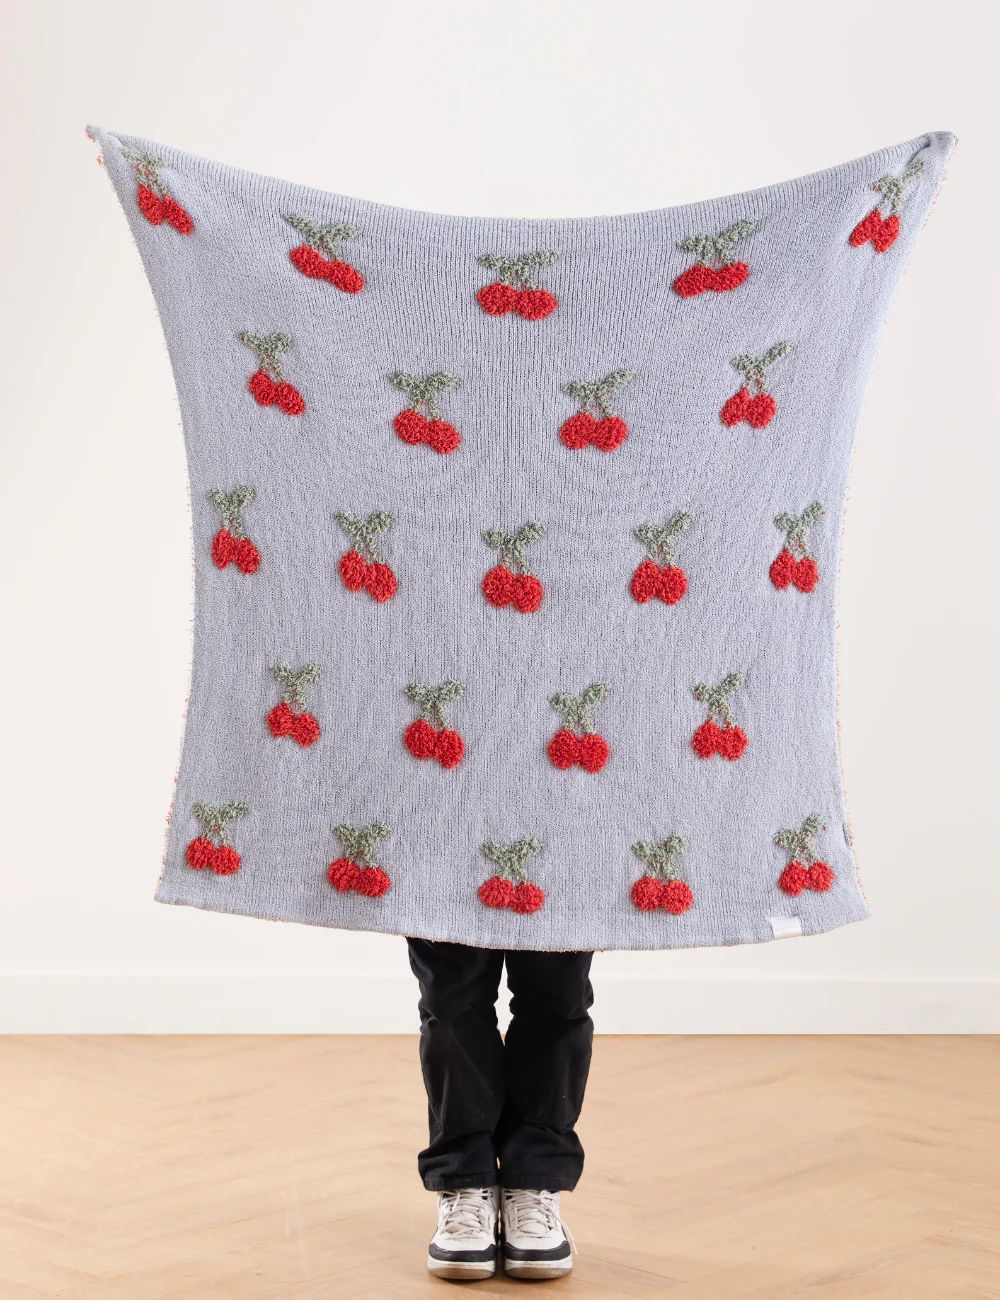 Cherries Buttery Blanket - Receiving | The Styled Collection